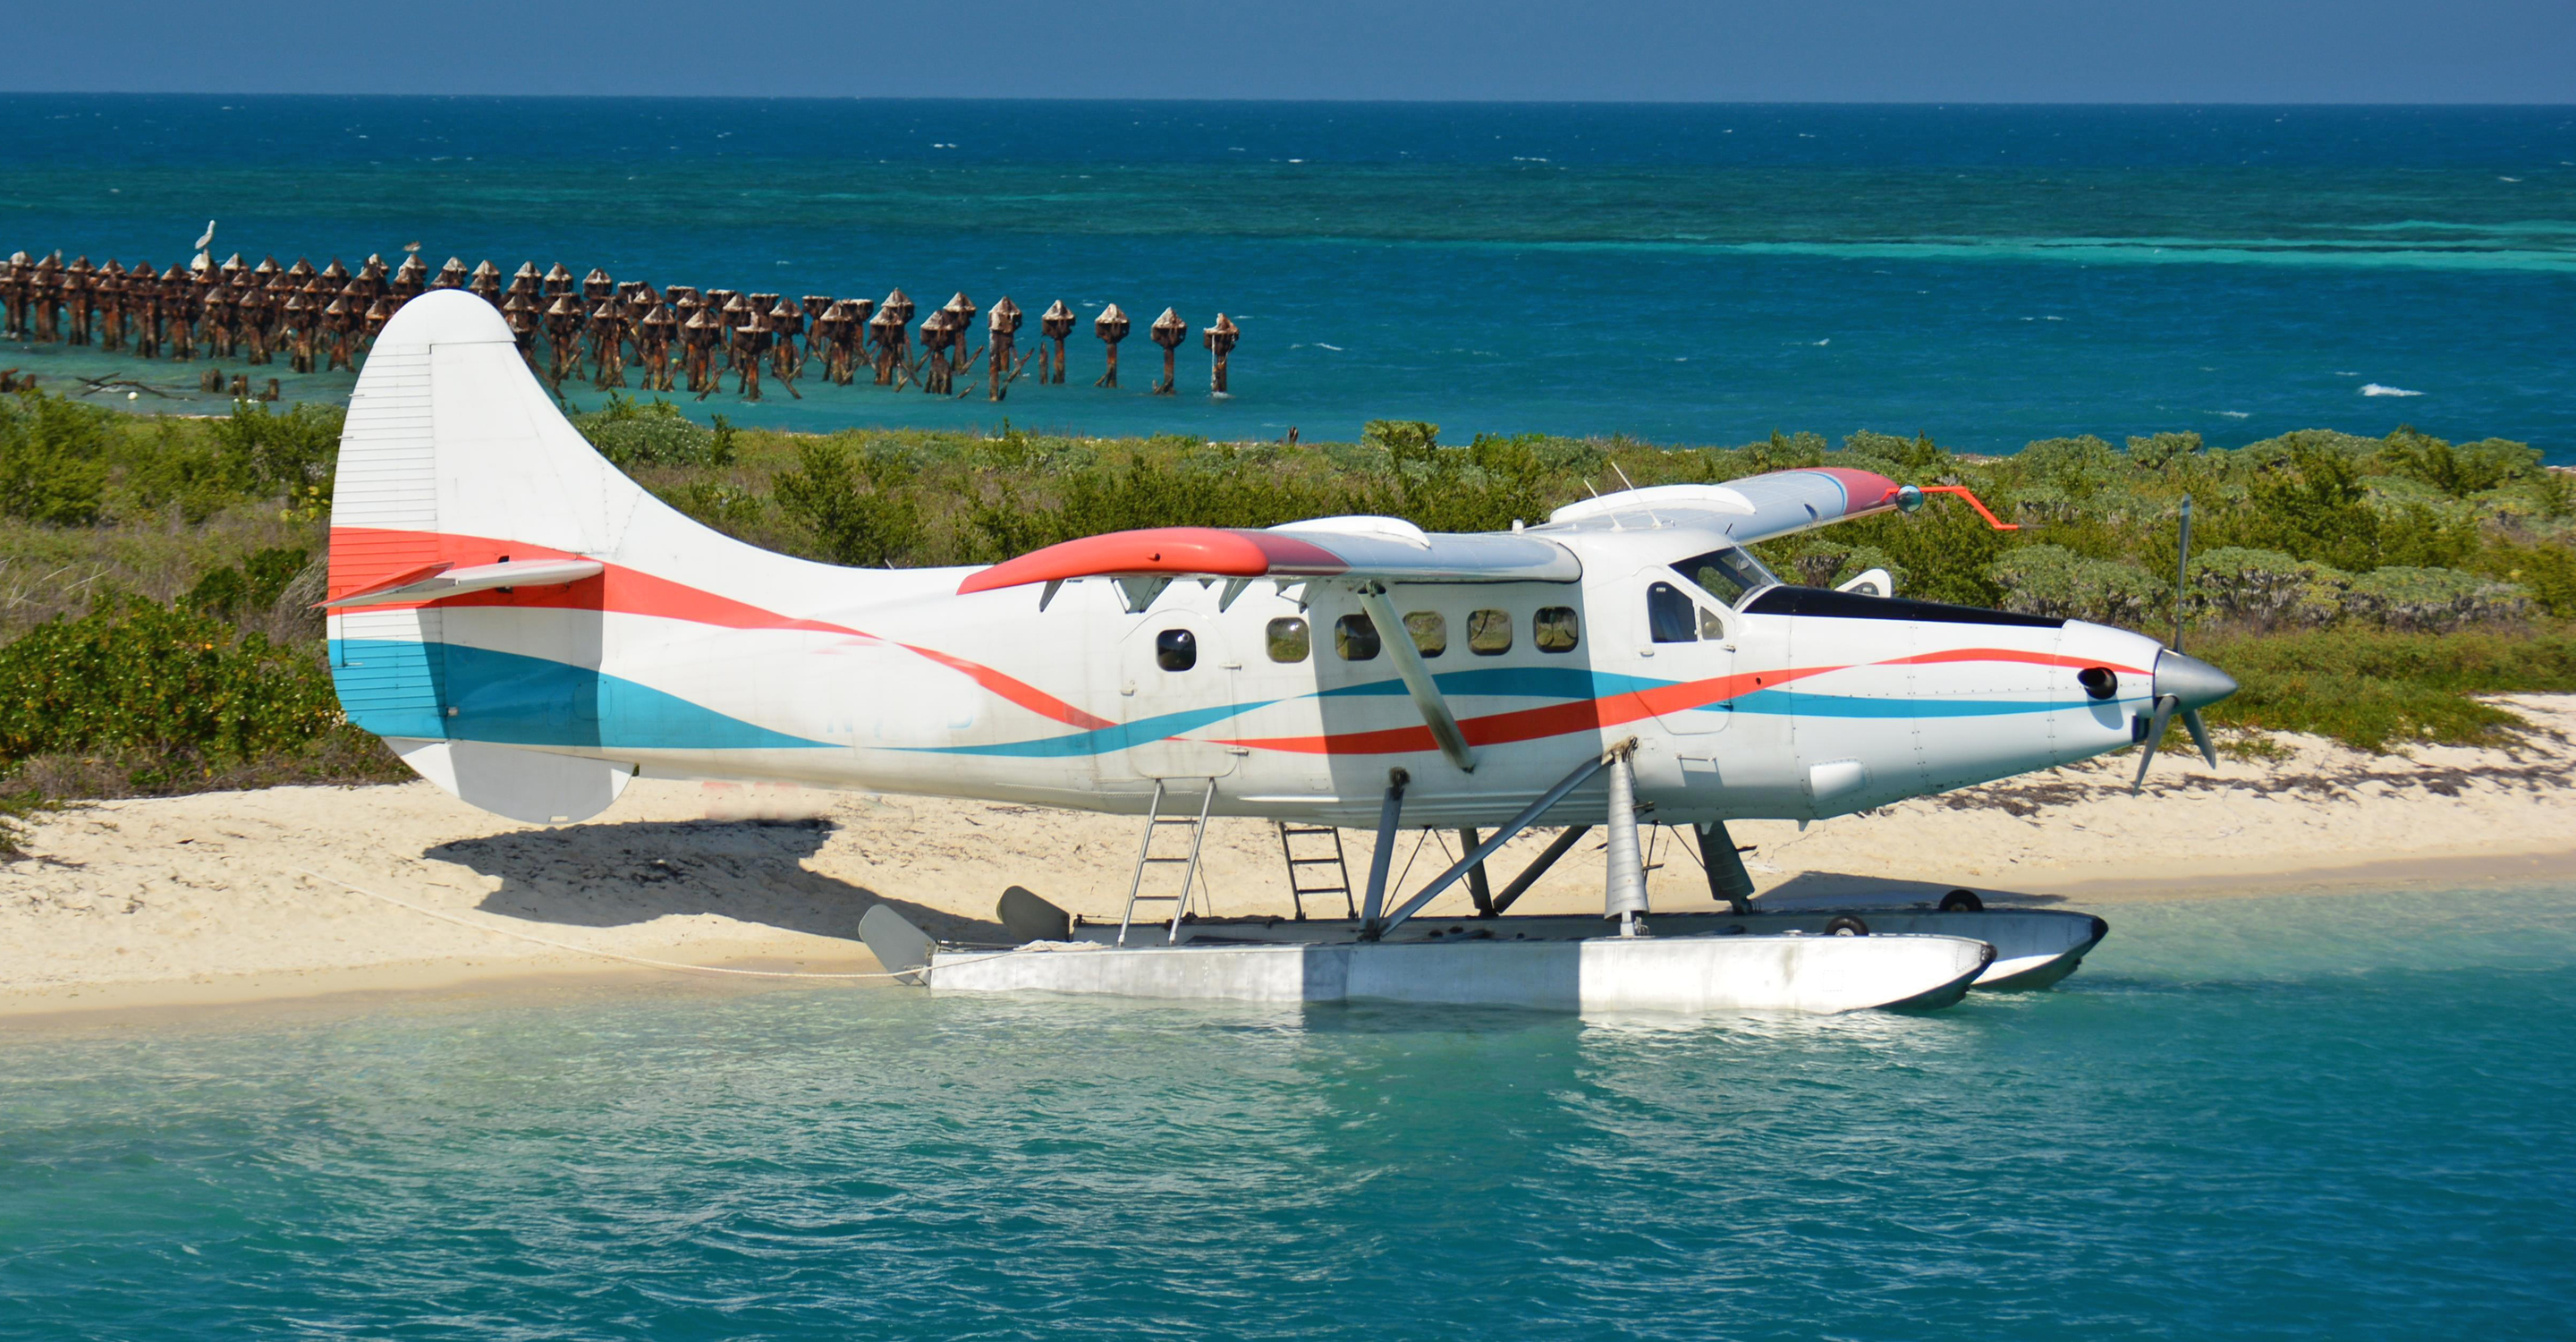 Seaplane sitting on shore in Tortugas National Park, Key West, Florida, United States